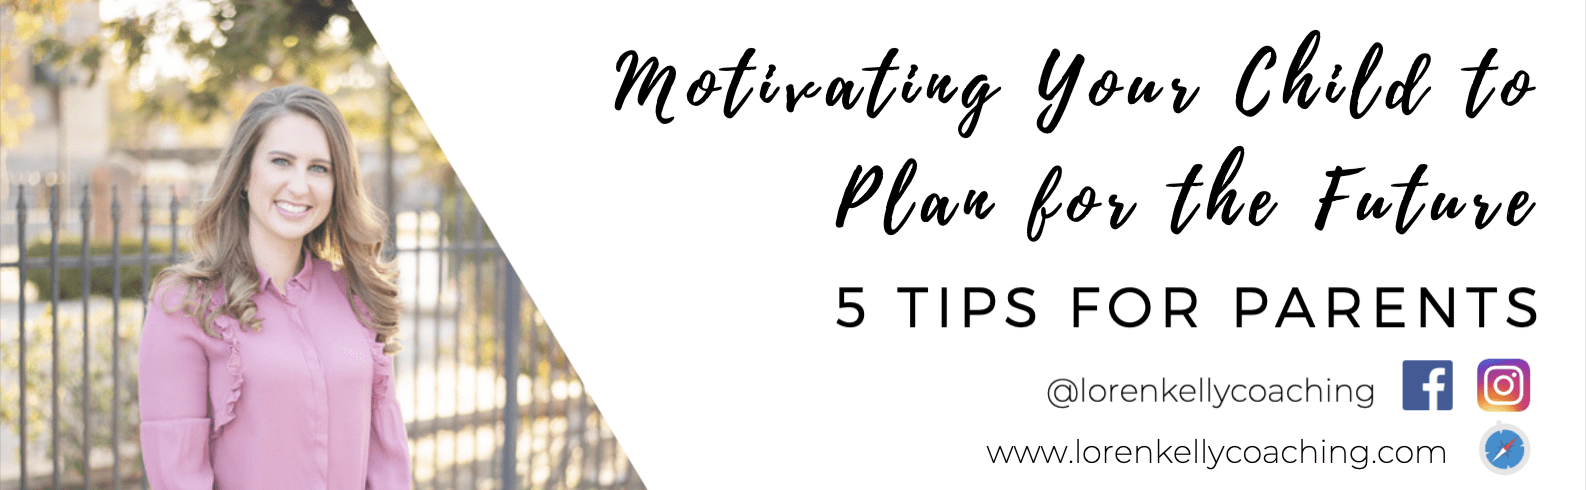 motivating your child to plan for the future